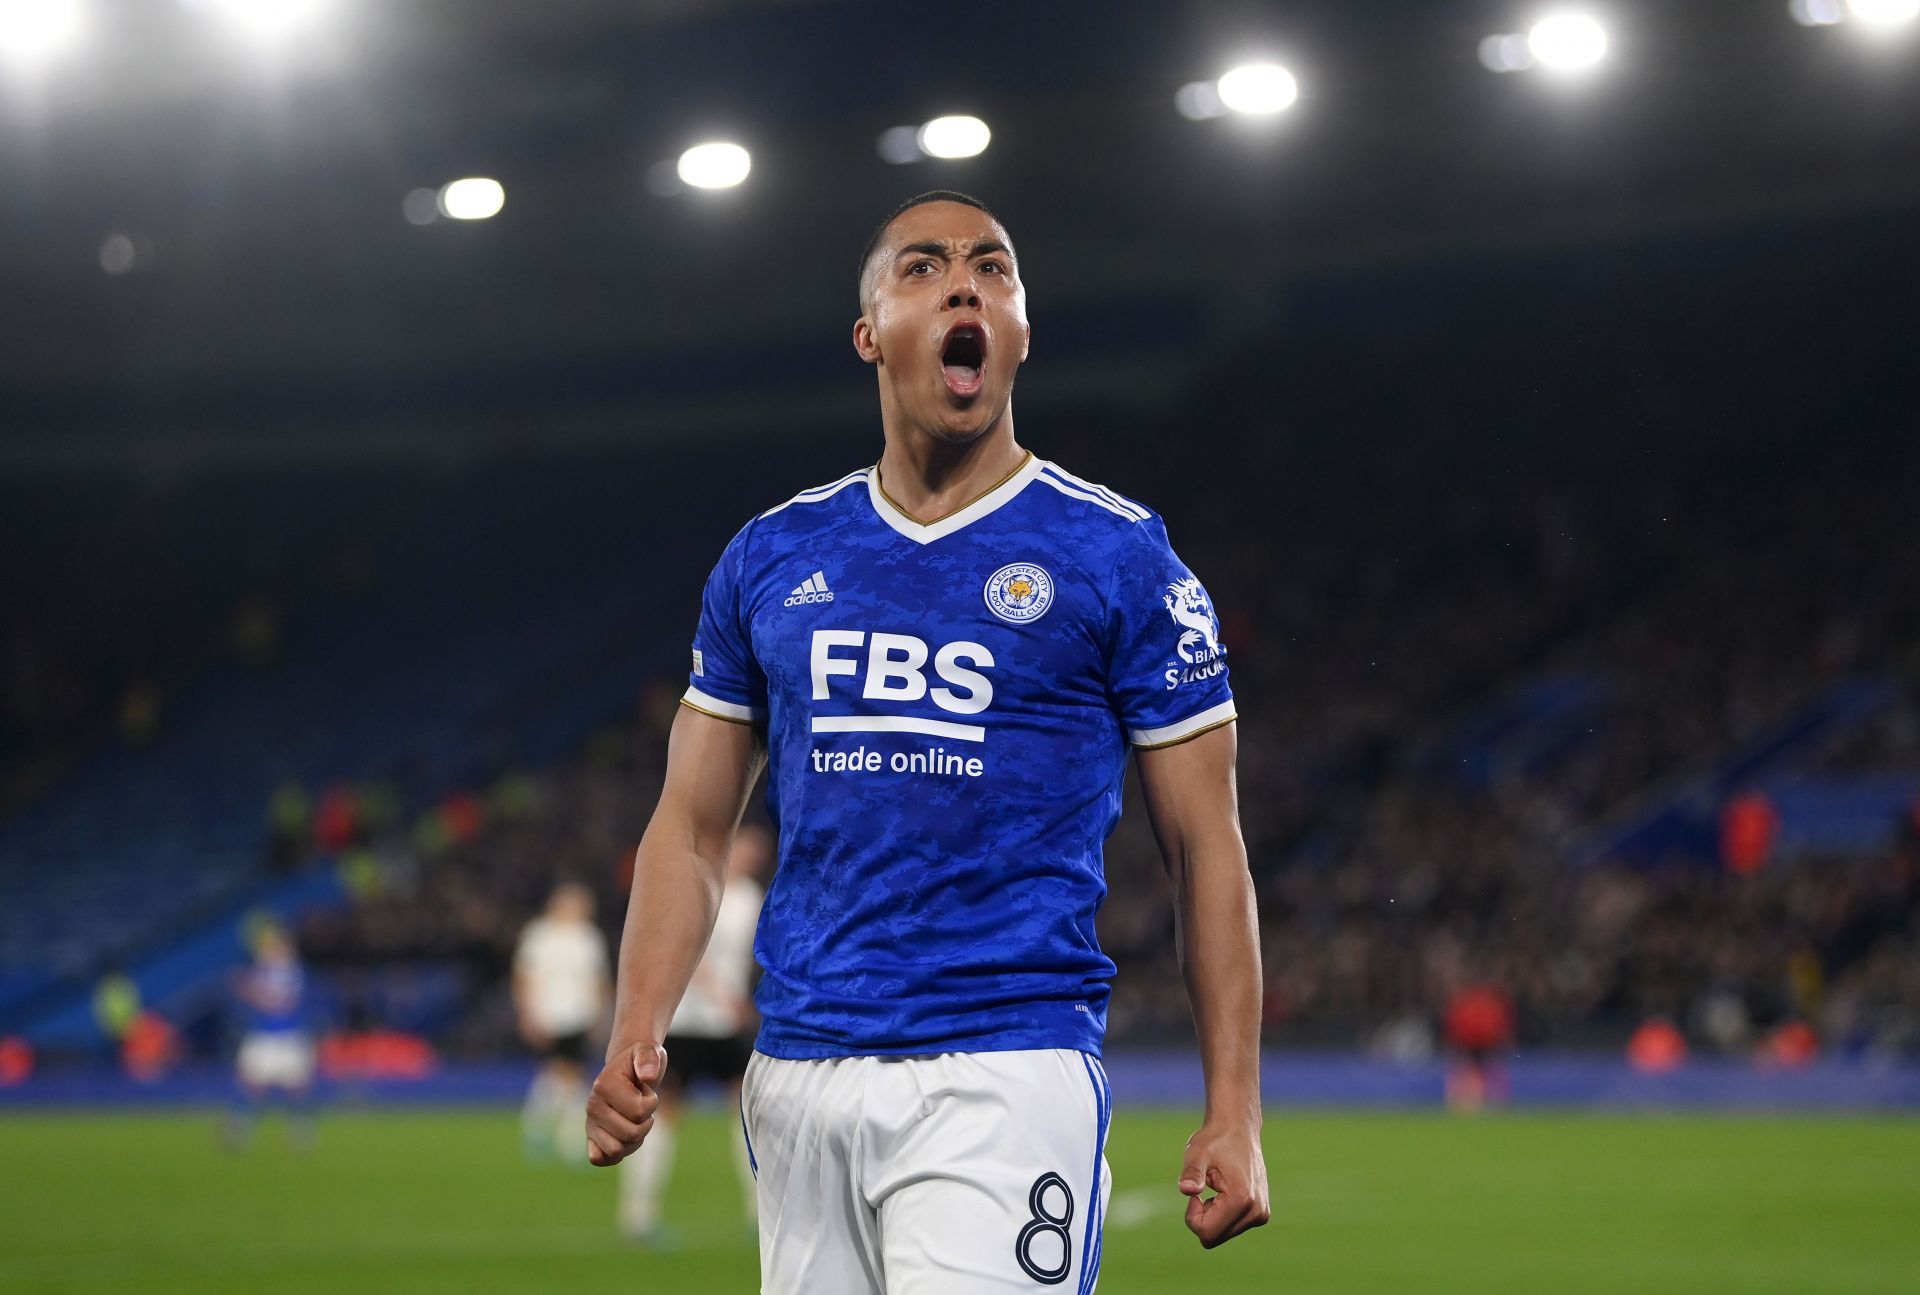 Tielemans has been great for Leicester